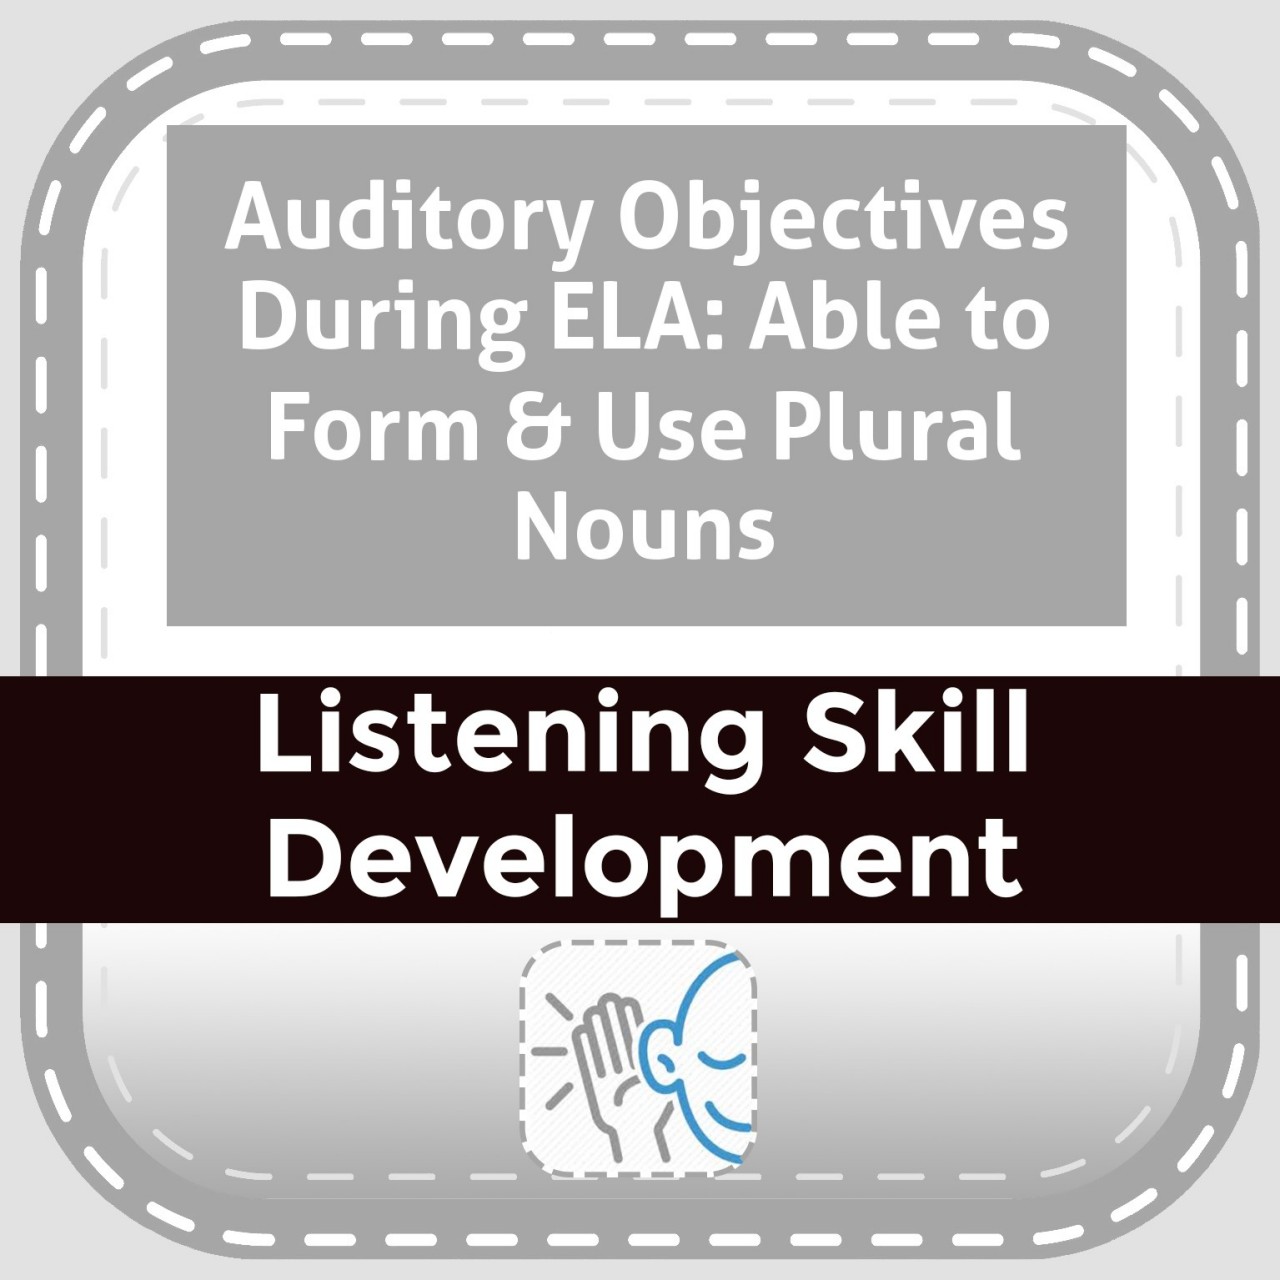 Auditory Objectives During ELA: Able to Form & Use Plural Nouns